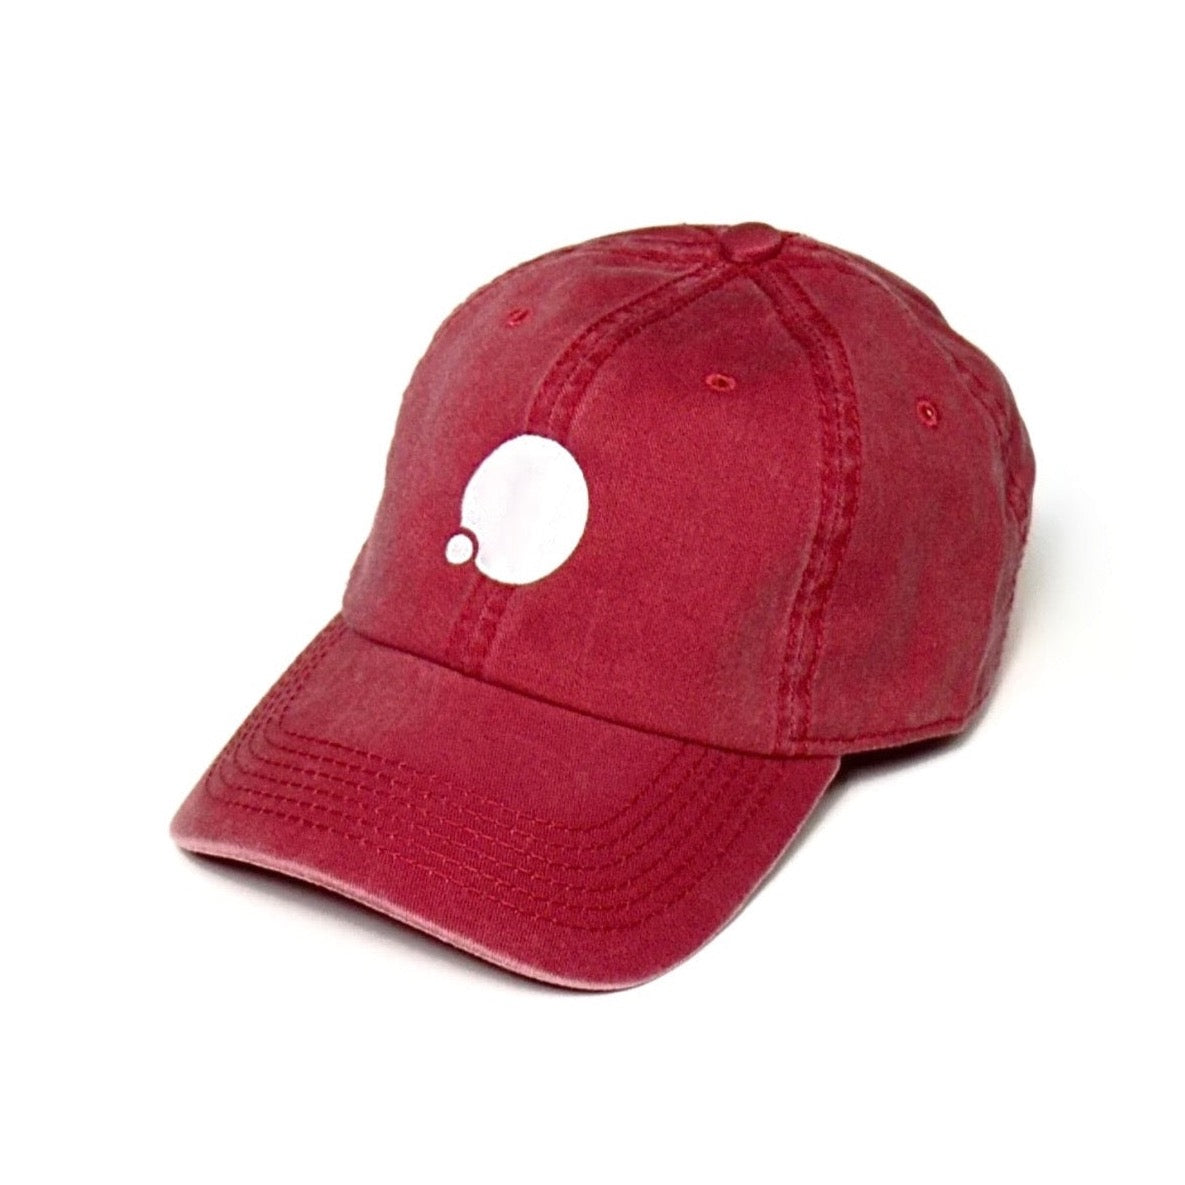 DREAM Embroidered Cap (Vintage Red)